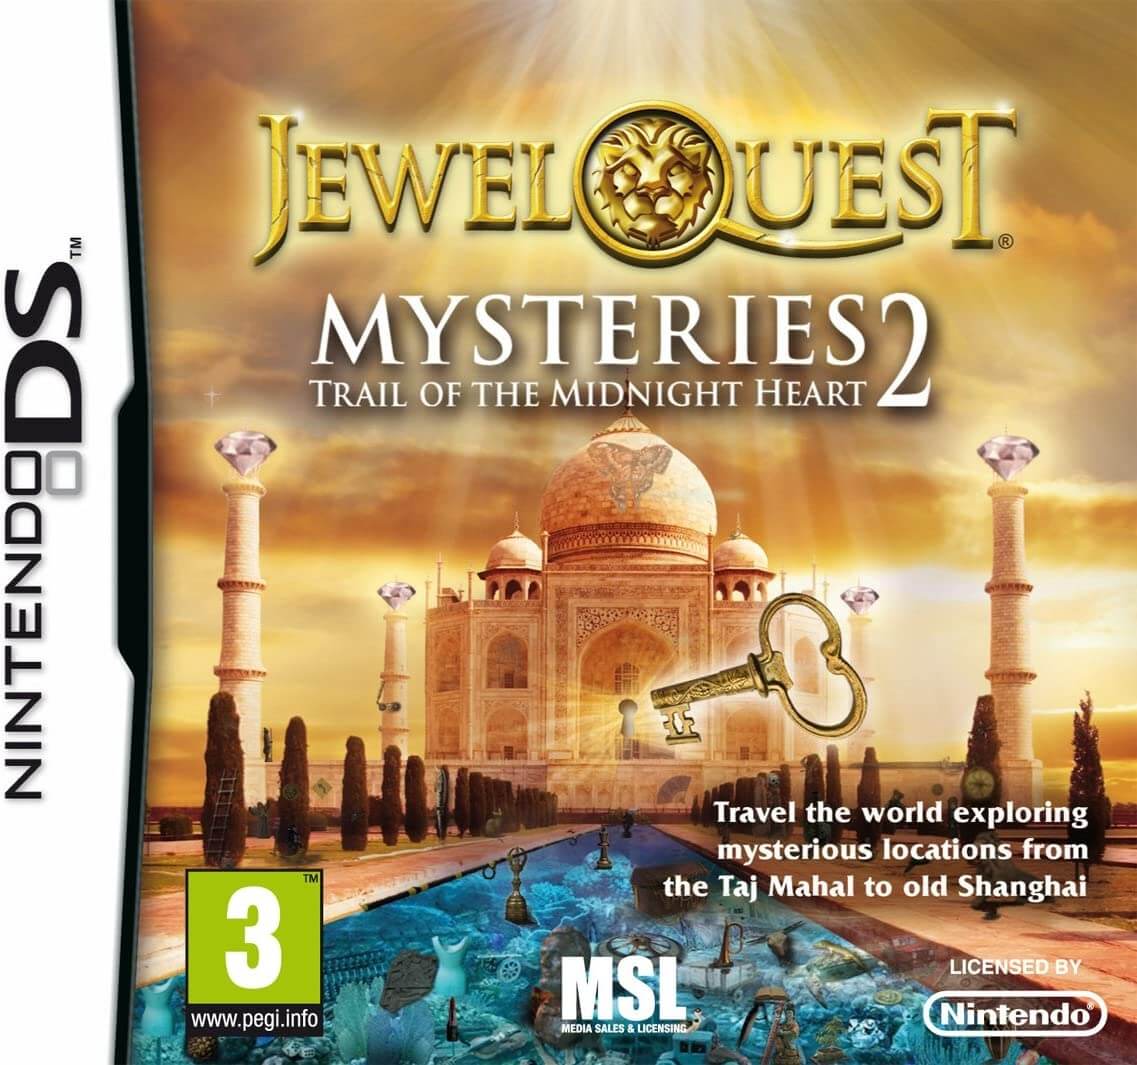 jewel-quest-mysteries-2-trail-of-the-midnight-heart-rom-nintendo-ds-game